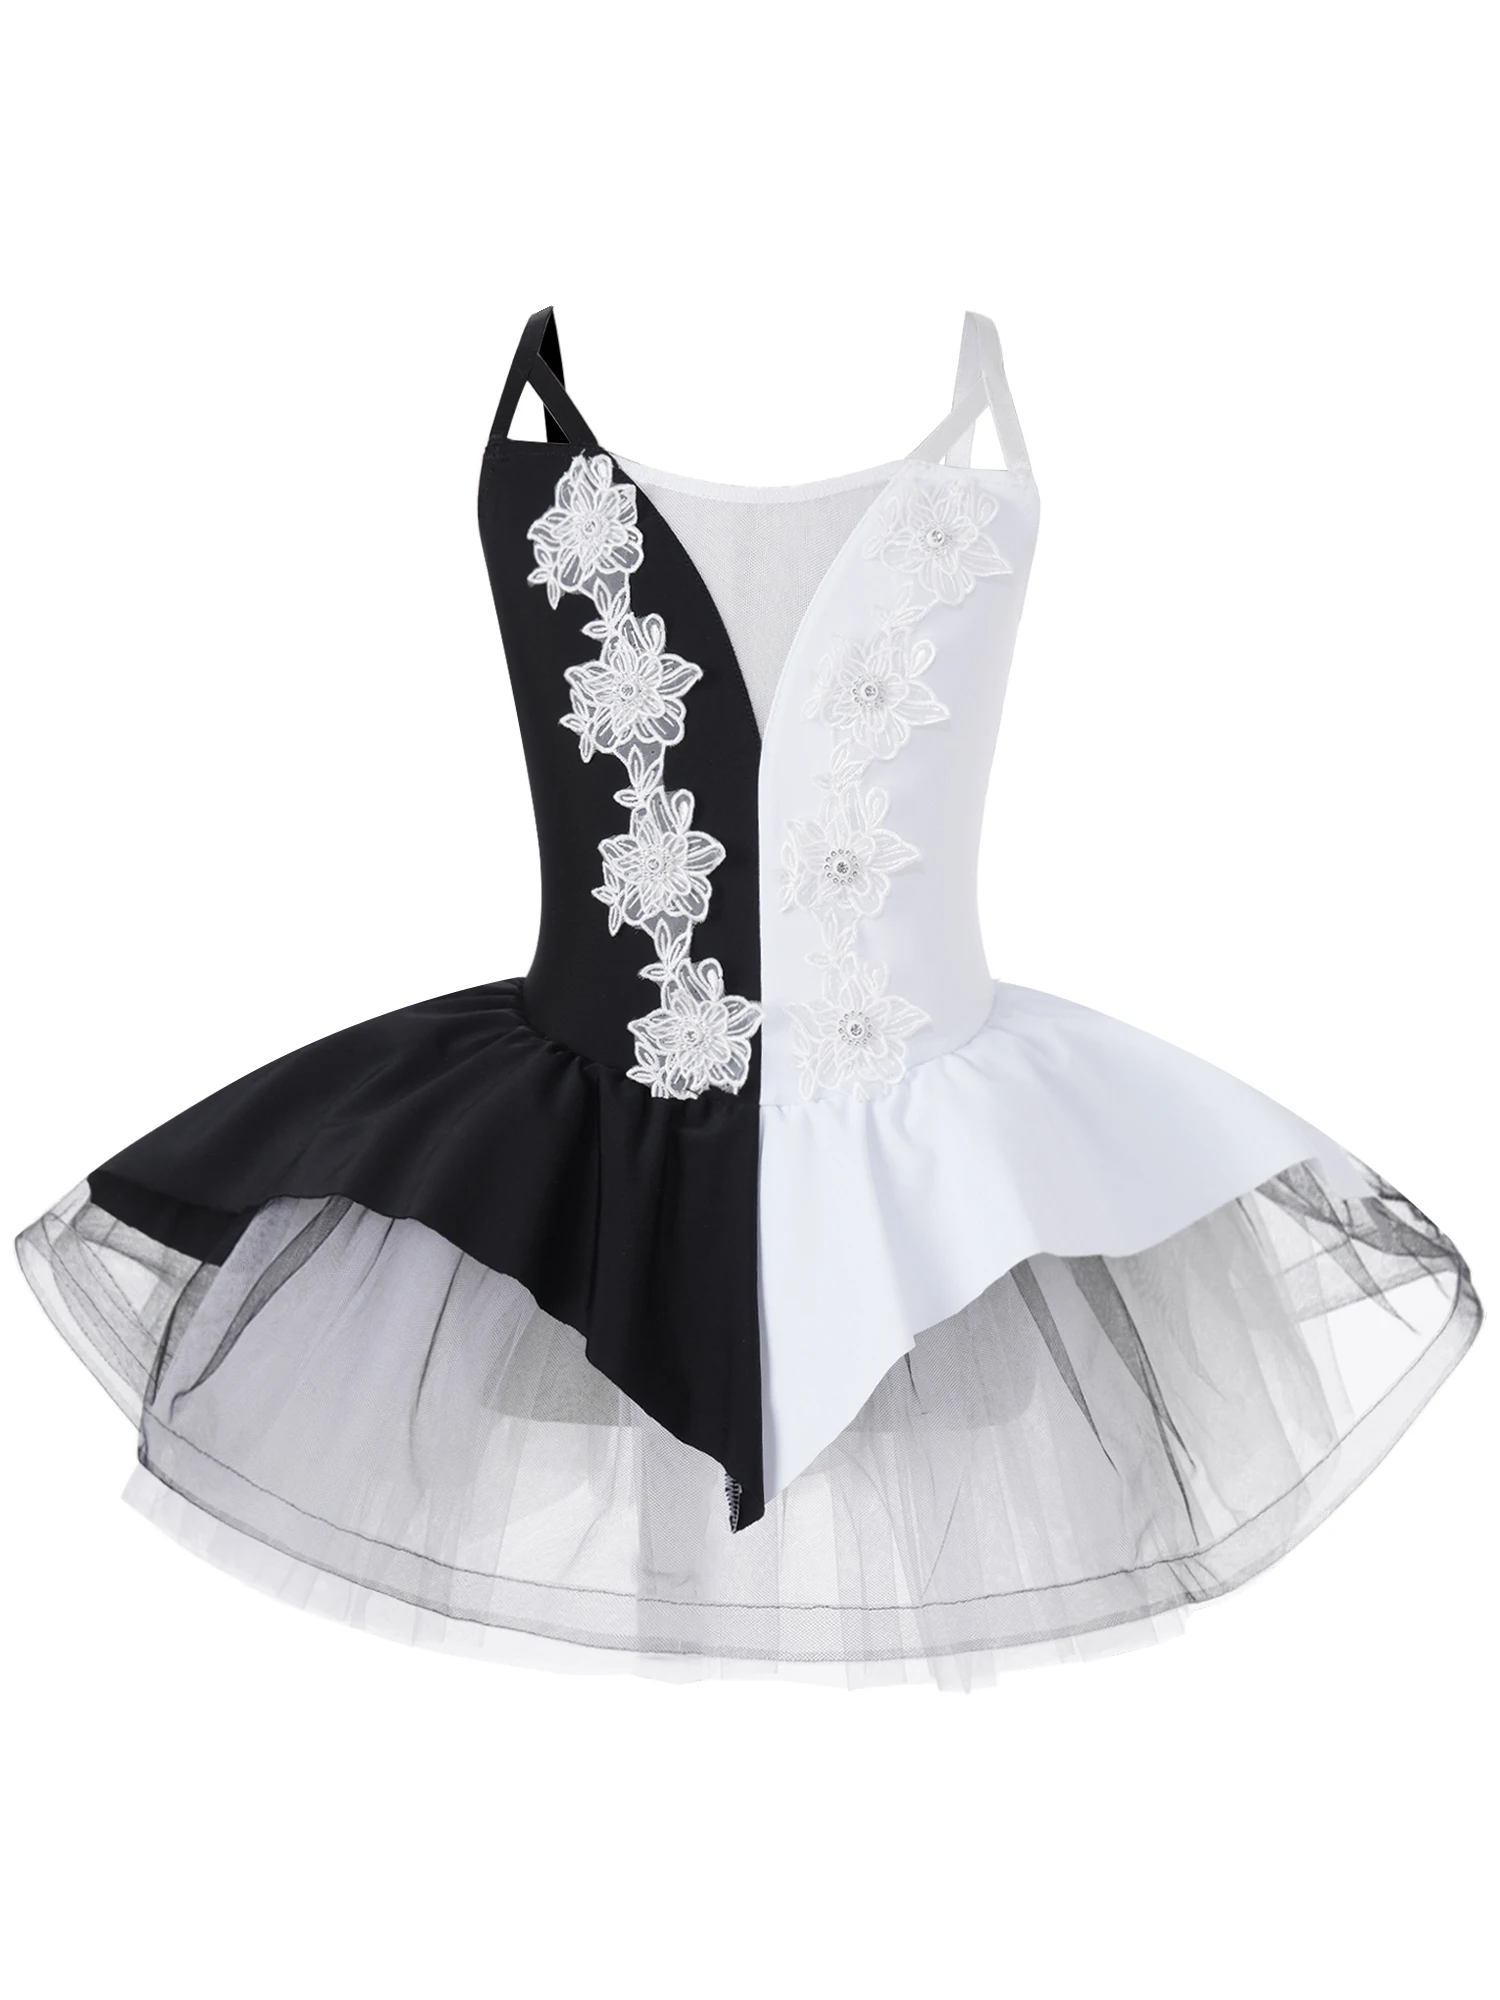 

Kid Girls Sleeveless Round Neckline Shiny Rhinestone Decorated Floral Contrast Color Tutu Mesh Ballet Dance Dress for Party Wear